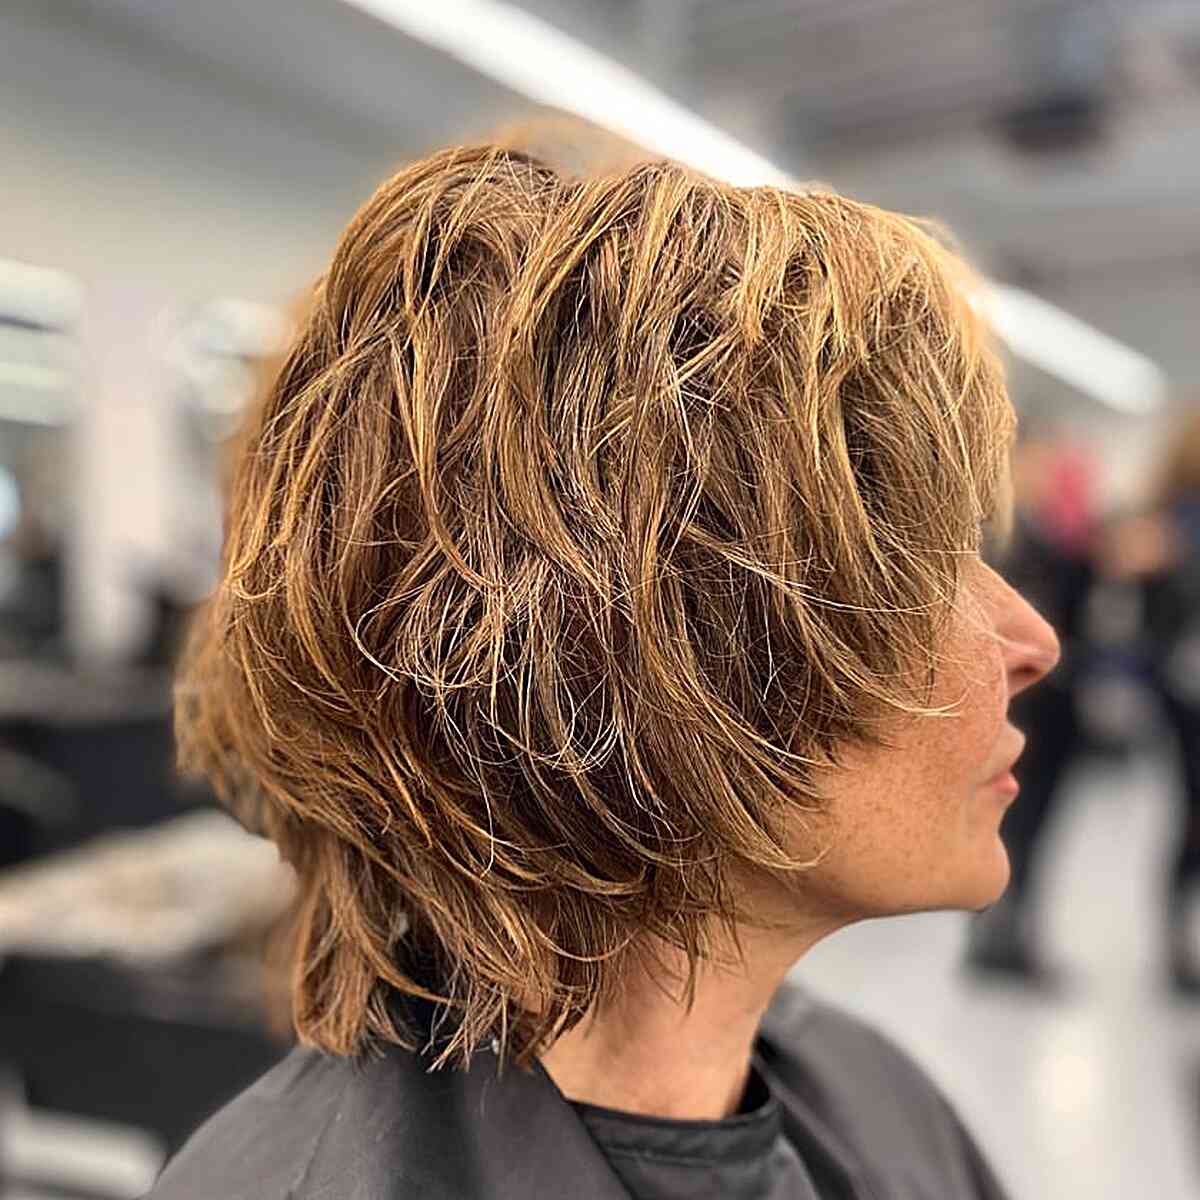 Neck-Length Messy Shagged Short Cut for Older women with Straight Hair